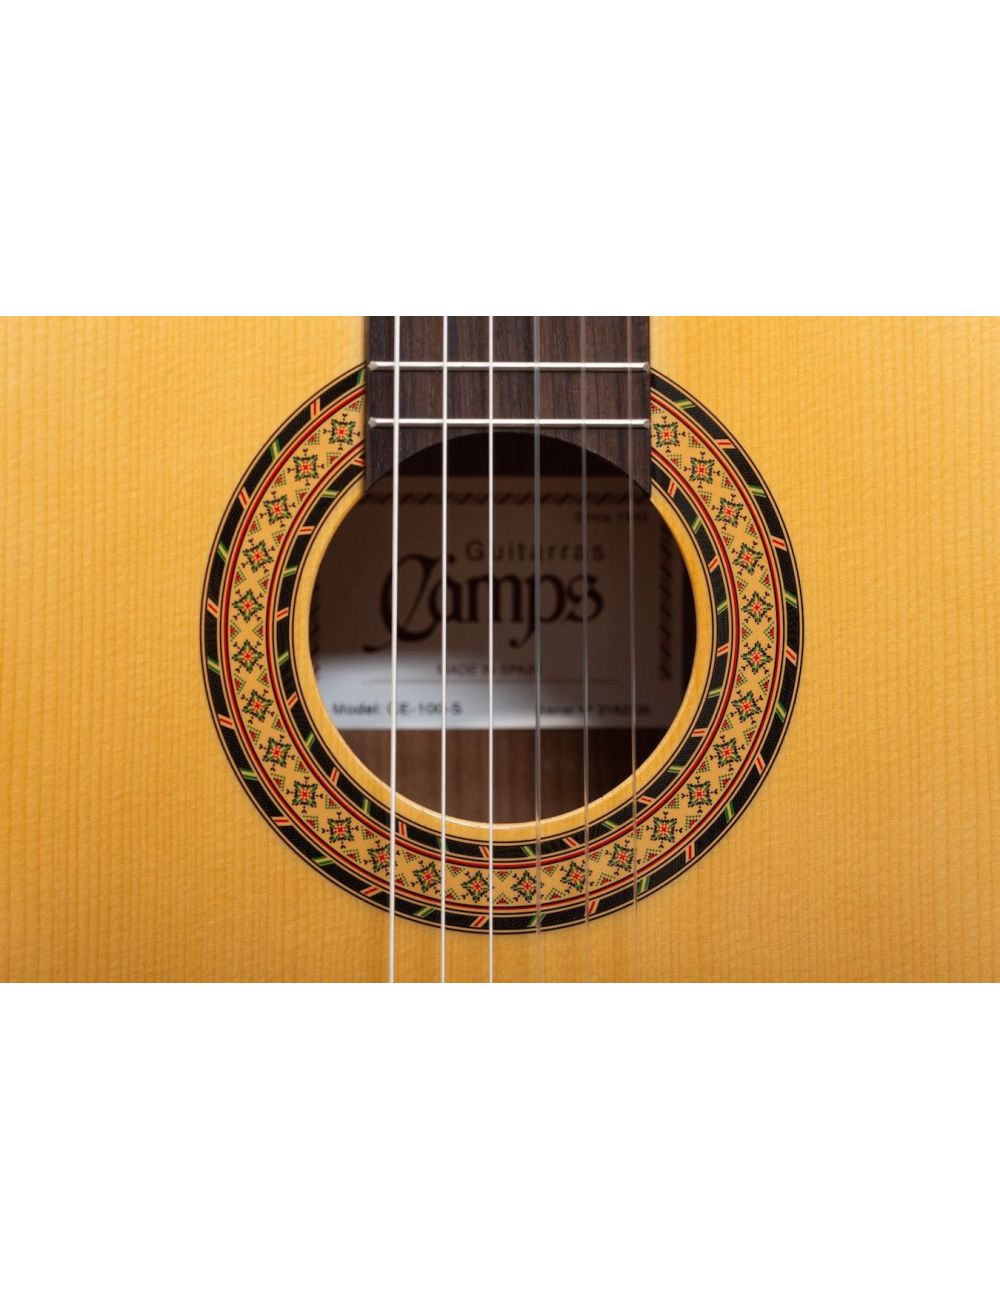 Camps CE100 Electro Classical Guitar CE-100 Electro-Classical